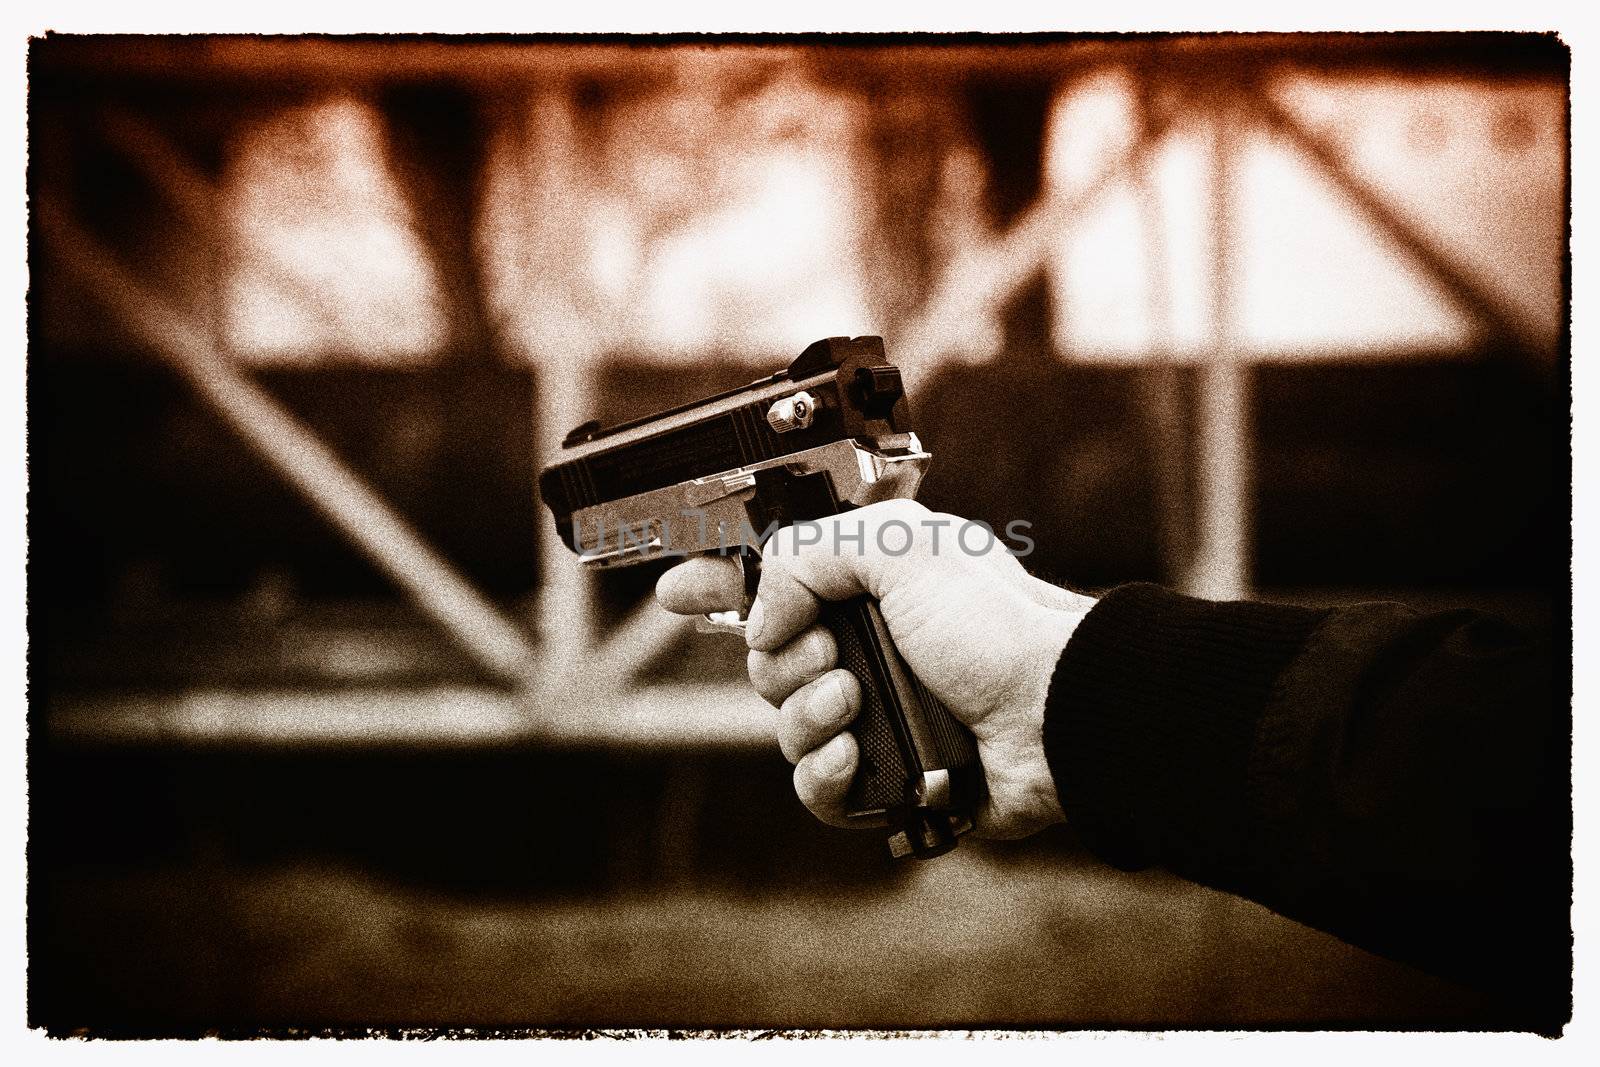 Hand with airgun. Filmgrain and frame added to reflect more violence. Useful concept.